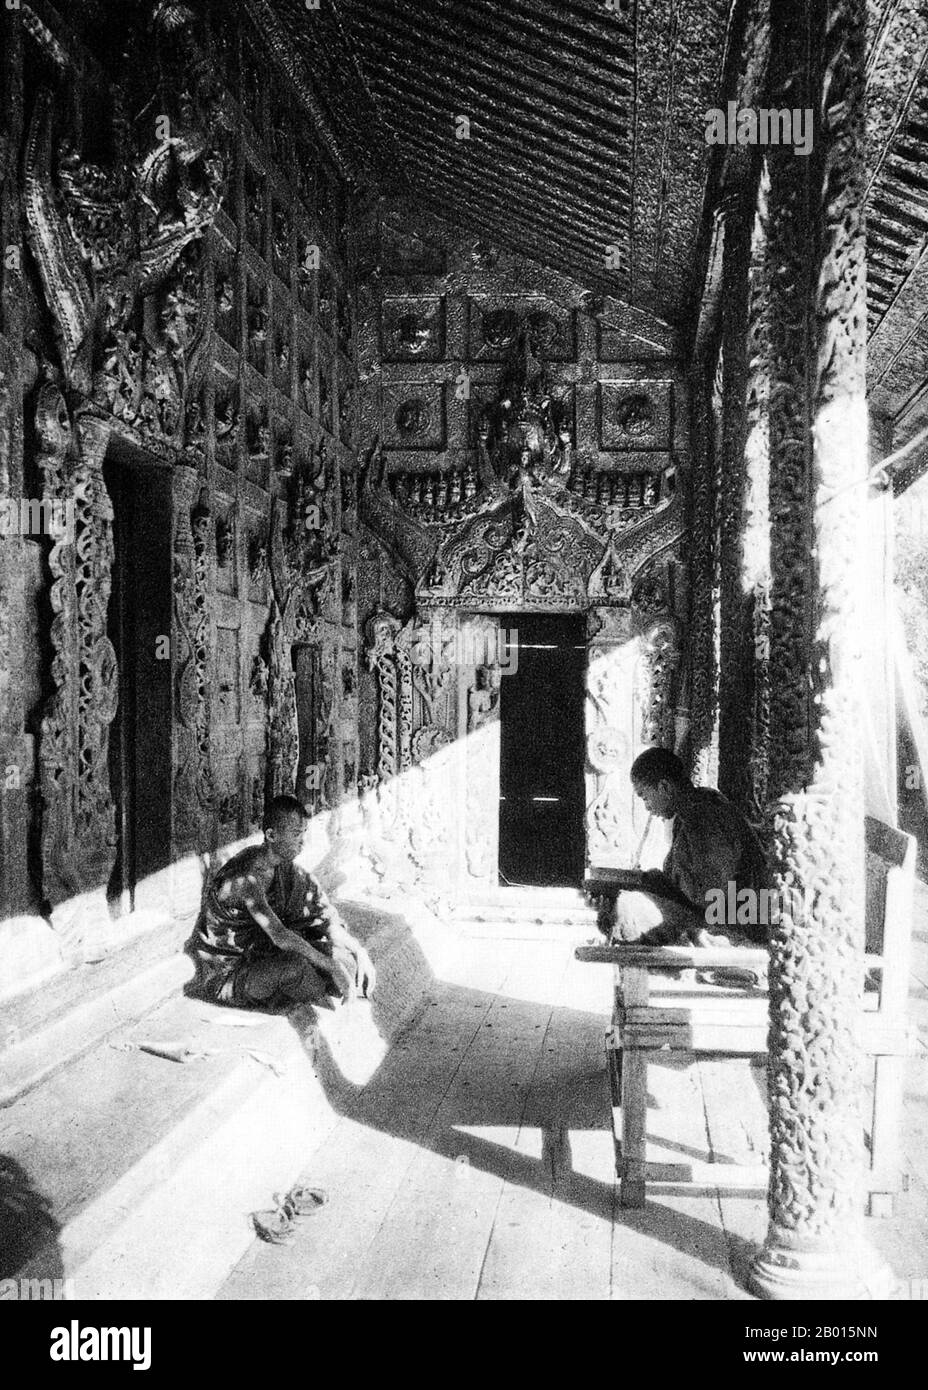 Burma/Myanmar: A Buddhist monk teaches his student in the Queen's Golden Monastery inside Mandalay Palace, c. 1920s.  The Queen's Golden Monastery was constructed on the orders of Queen Supayalat in 1885. It was barely completed when she was exiled to India with her husband Thibaw, the last king of Burma (r. 1878-1885), following the annexation of Upper Burma by the British Empire. Now destroyed, the monastery stood inside the Mandalay Palace grounds and was a magnificent wooden building lavishly decorated with ornate woodcarving and mirrored glass mosaics. Stock Photo